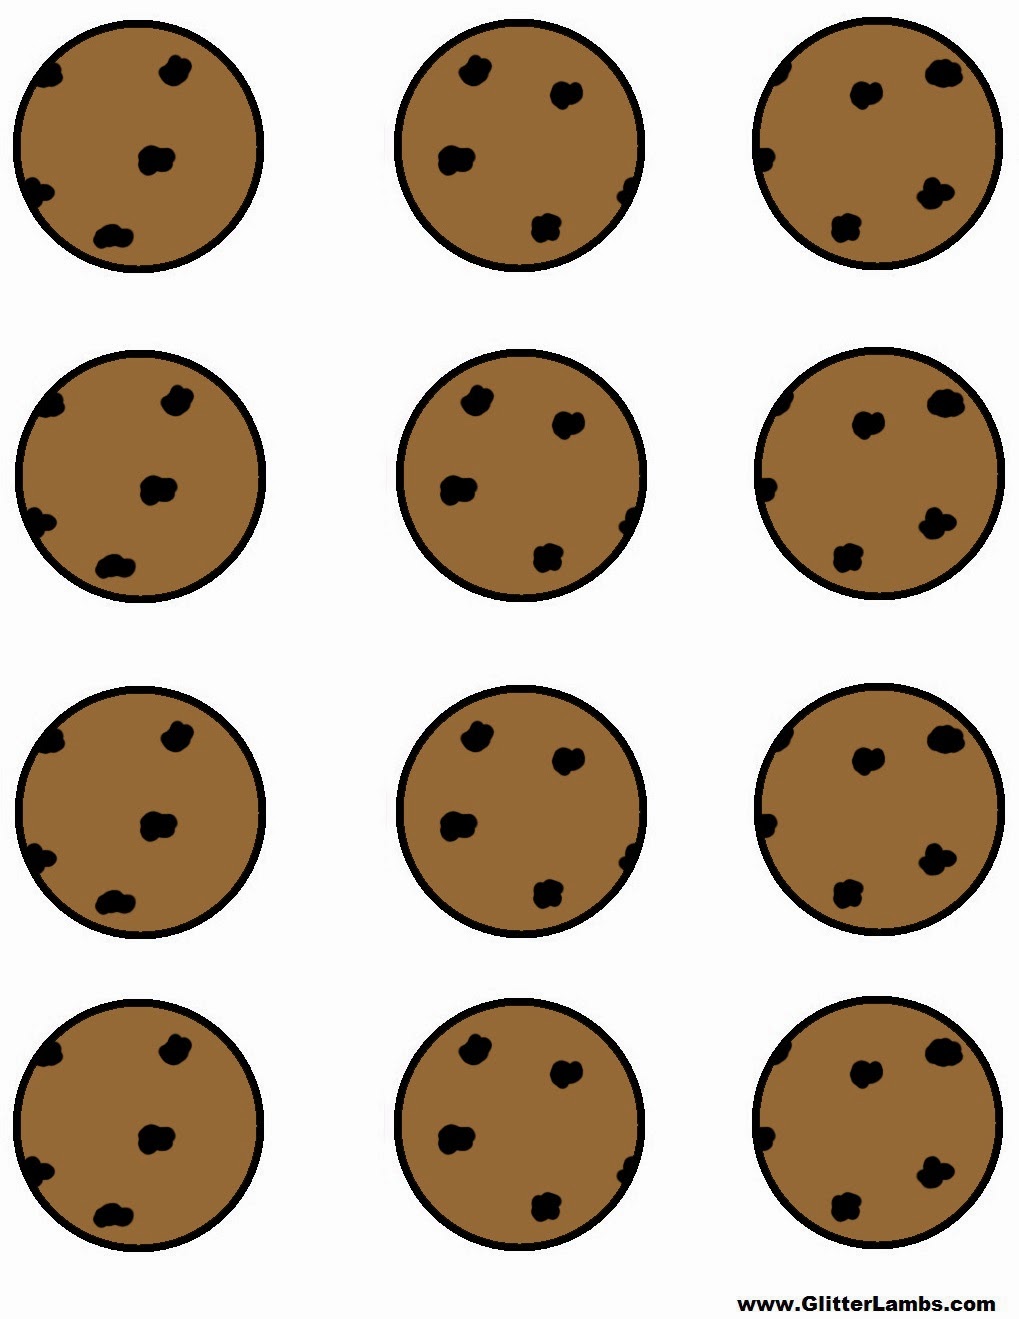 chocolate-chip-cookies-coloring-pages-free-download-on-clipartmag